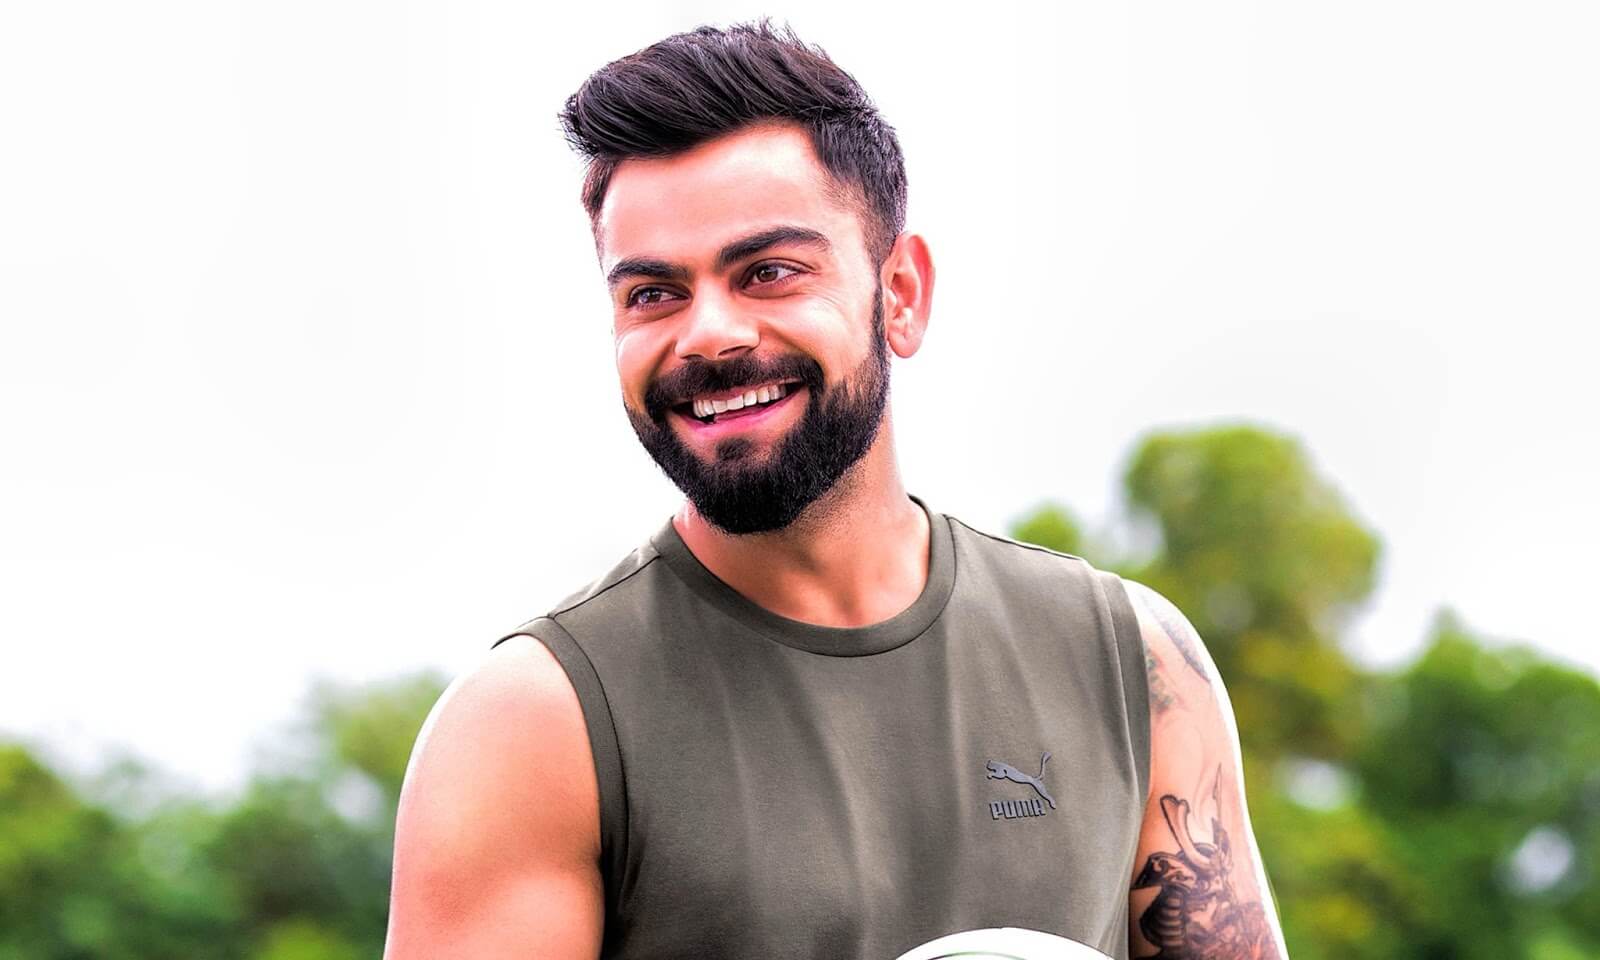 Best Beard Styles Of Virat Kohli Find Health Tips 'do you know he's a vegan now?' he said with a piercing look of overt judgement. best beard styles of virat kohli find